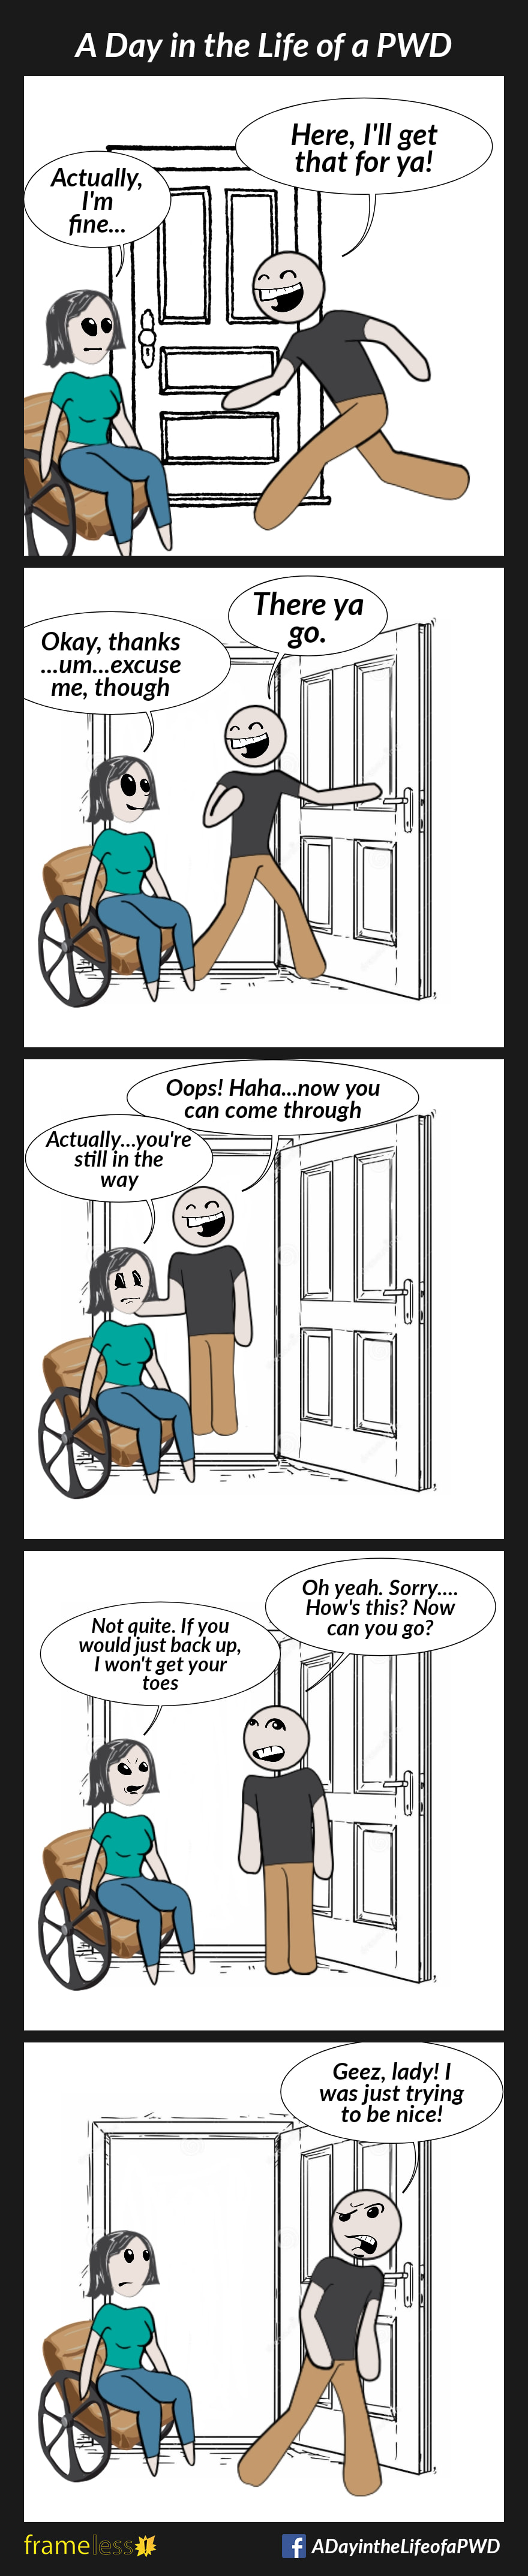 COMIC STRIP 
A Day in the Life of a PWD (Person With a Disability) 

Frame 1:
A woman in a wheelchair is about to open a door.
A man runs over to help.
MAN: Here, I'll get that for ya!
WOMAN: Actually, I'm fine...

Frame 2:
The man ignores her and holds the door open, but is still in the woman's way.
MAN: There ya go.
WOMAN: Okay, thanks...um...excuse me, though

Frame 3:
The man steps through the door and stands on the other side.
MAN: Oops! Haha...now you can come through
WOMAN: Actually...you're still in the way

Frame 4:
The man steps back through the door.
MAN (getting exasperated): Oh yeah. Sorry...how's this? Now can you go?
WOMAN (getting annoyed): Not quite. If you would just back up, I won't get your toes

Frame 5:
MAN (walking away angrily): Geez, lady! I was just trying to be nice!